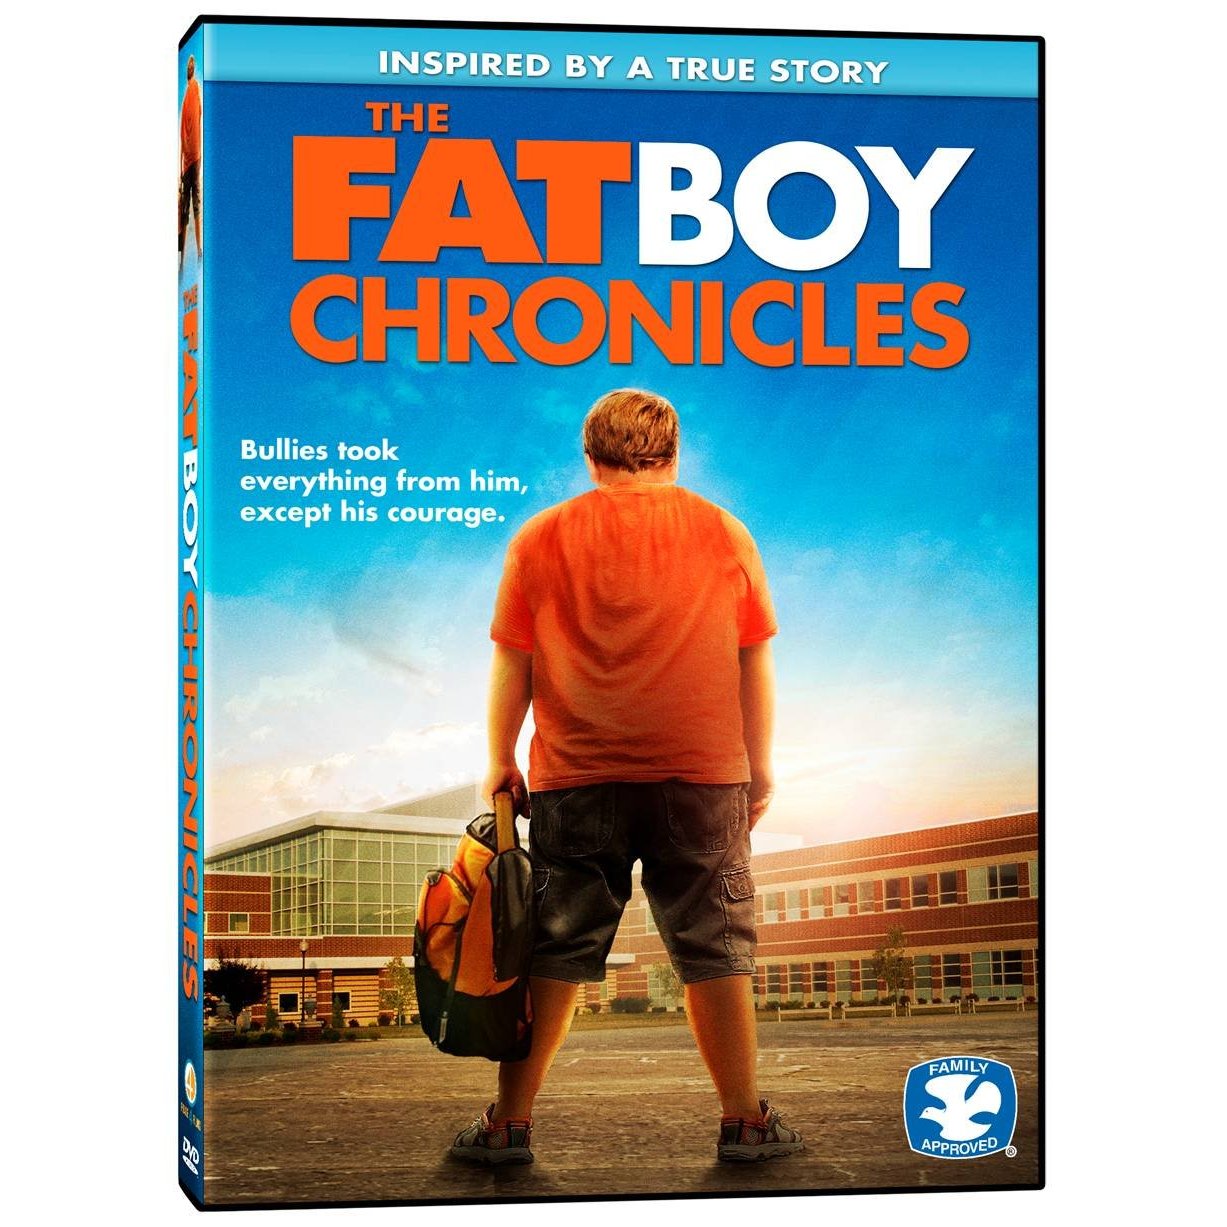 The Fat Boy Chronicles movie